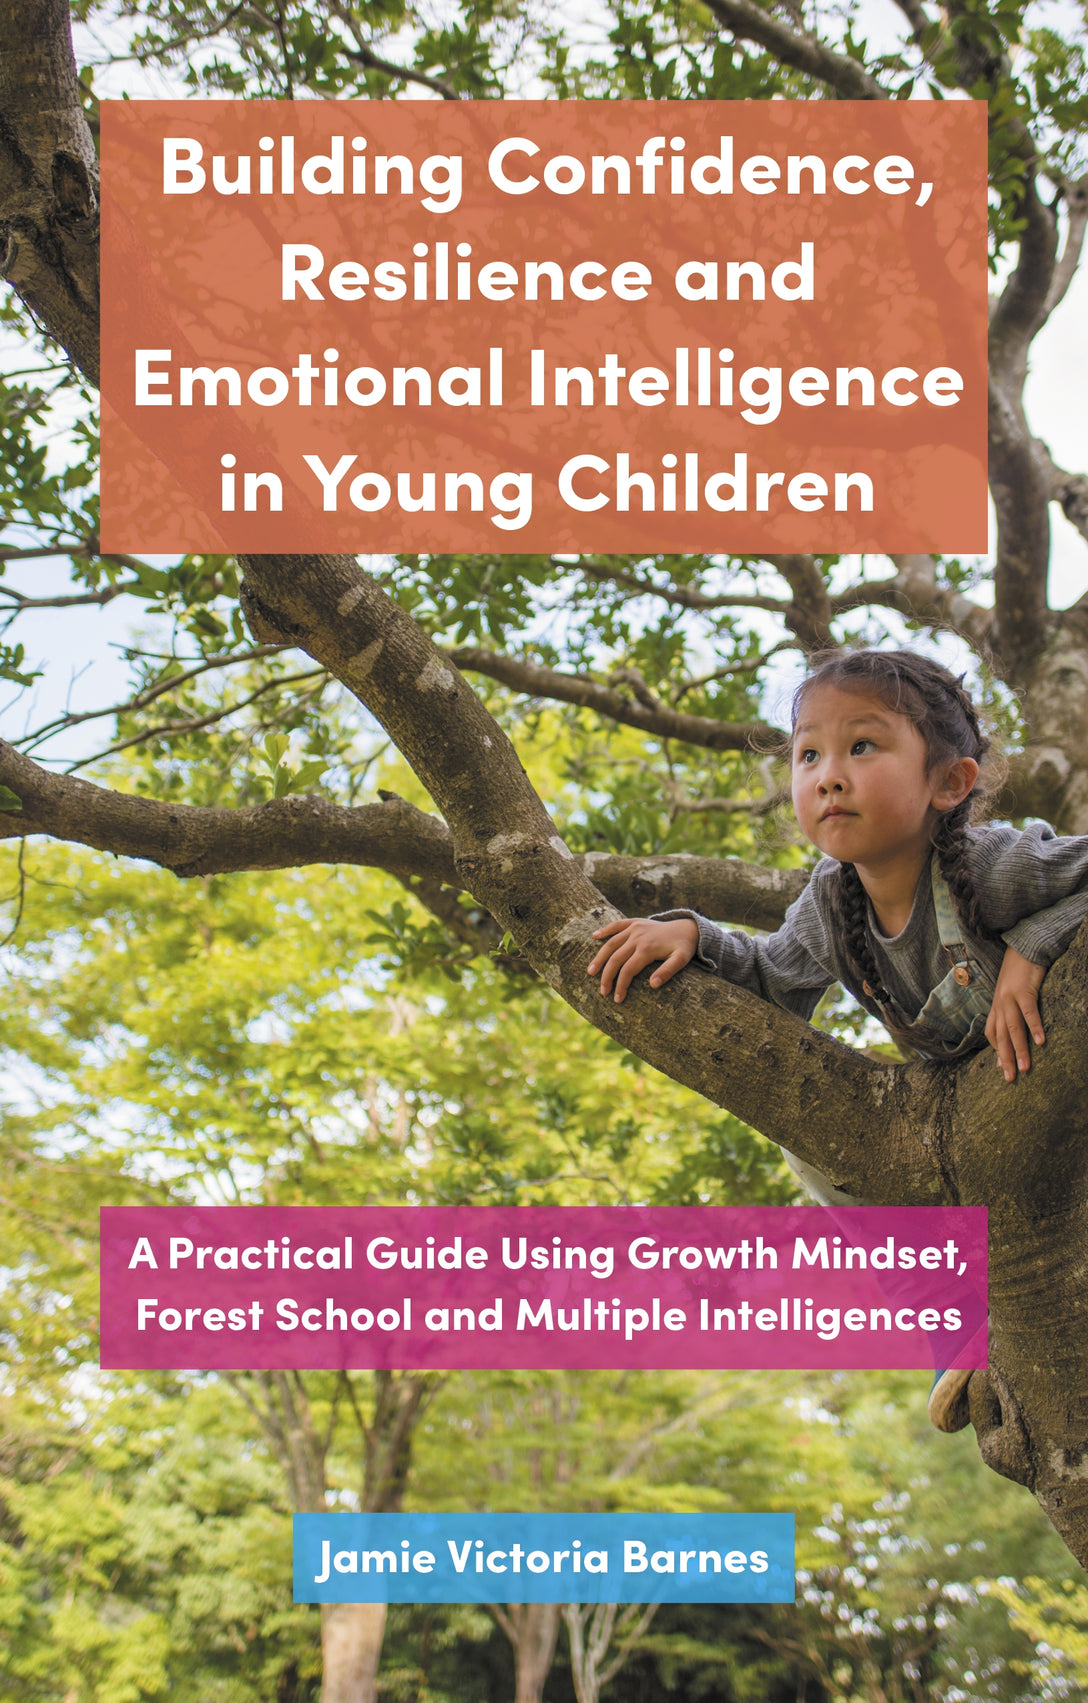 Building Confidence, Resilience and Emotional Intelligence in Young Children by Jamie Victoria Barnes